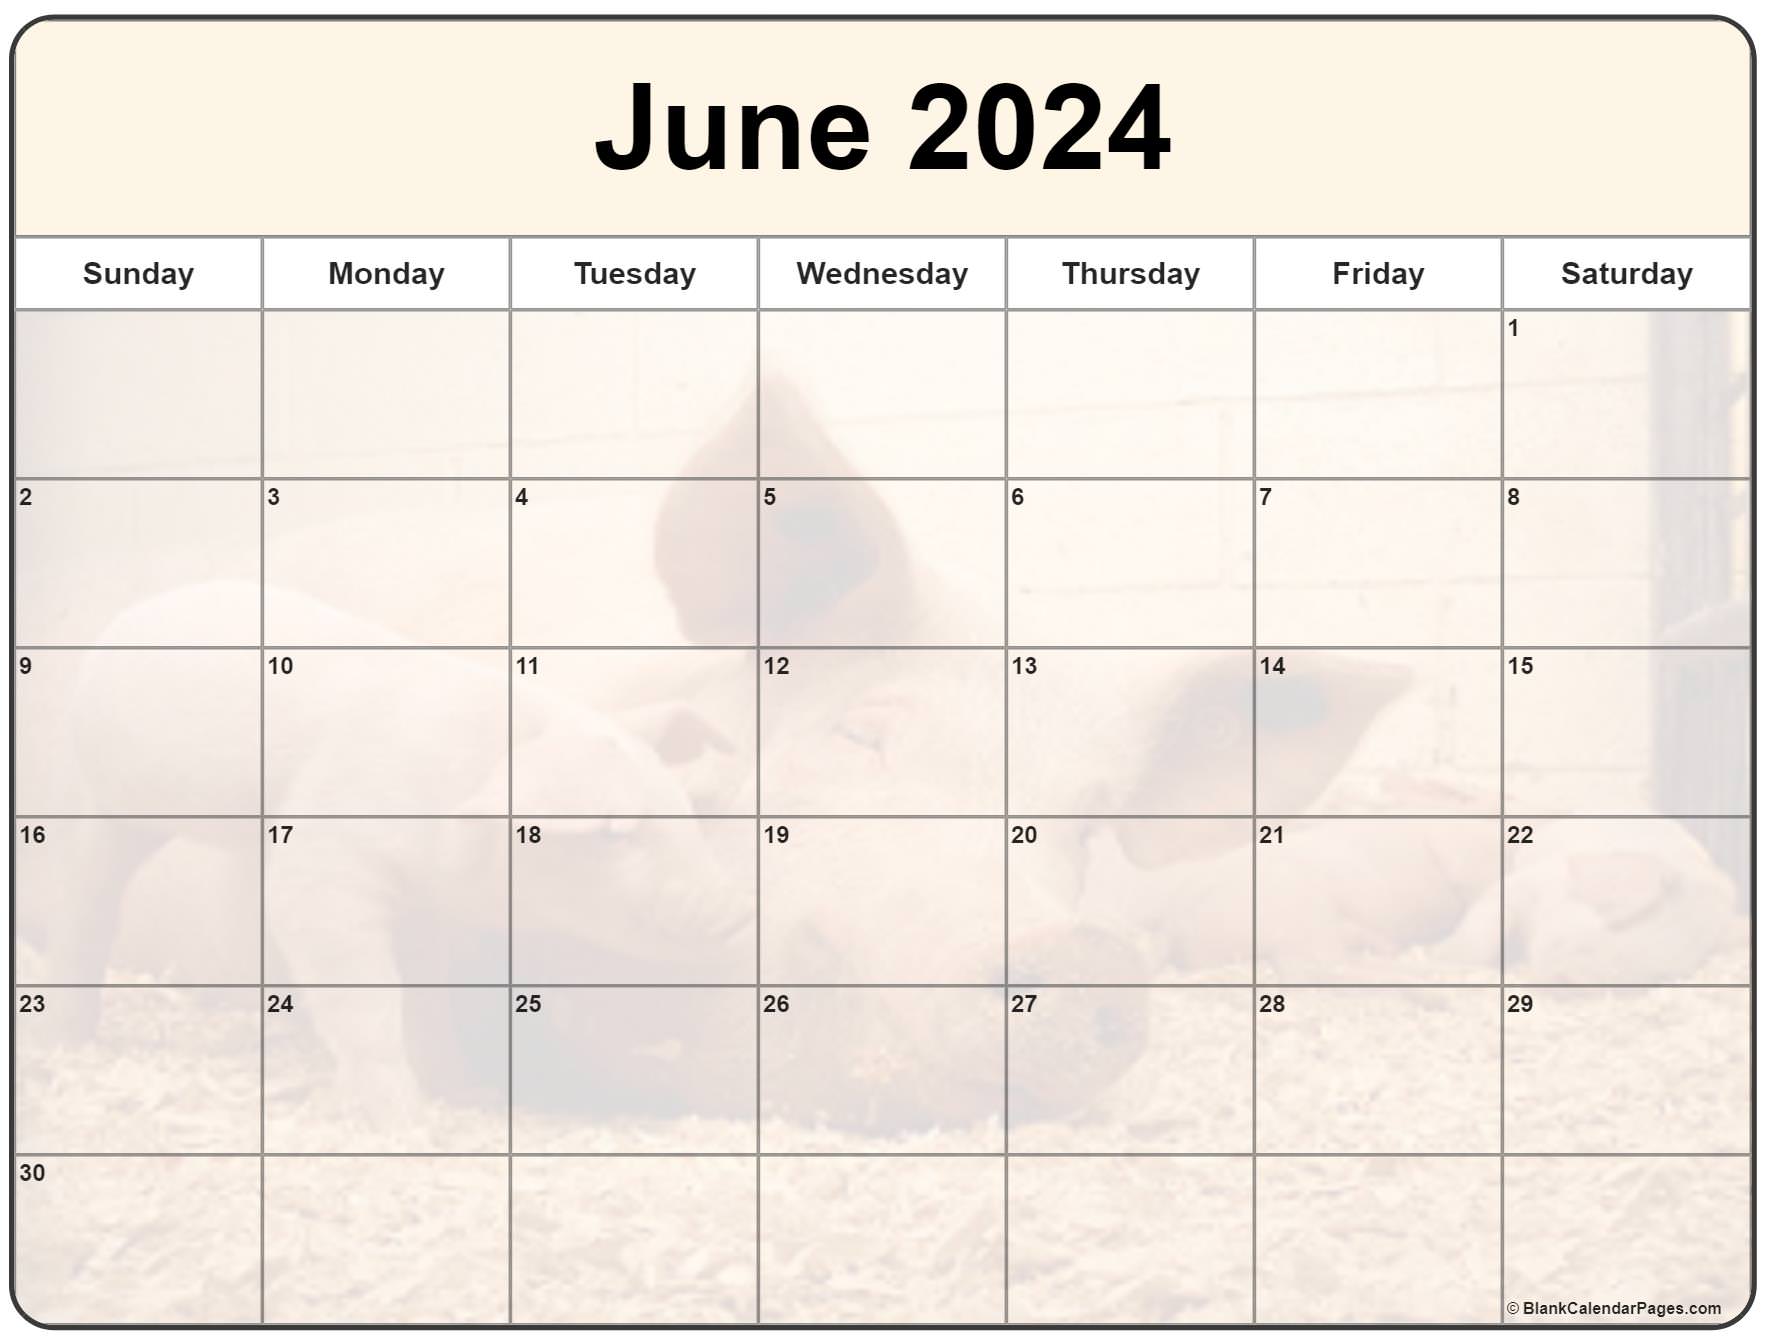 Collection of June 2024 photo calendars with image filters.